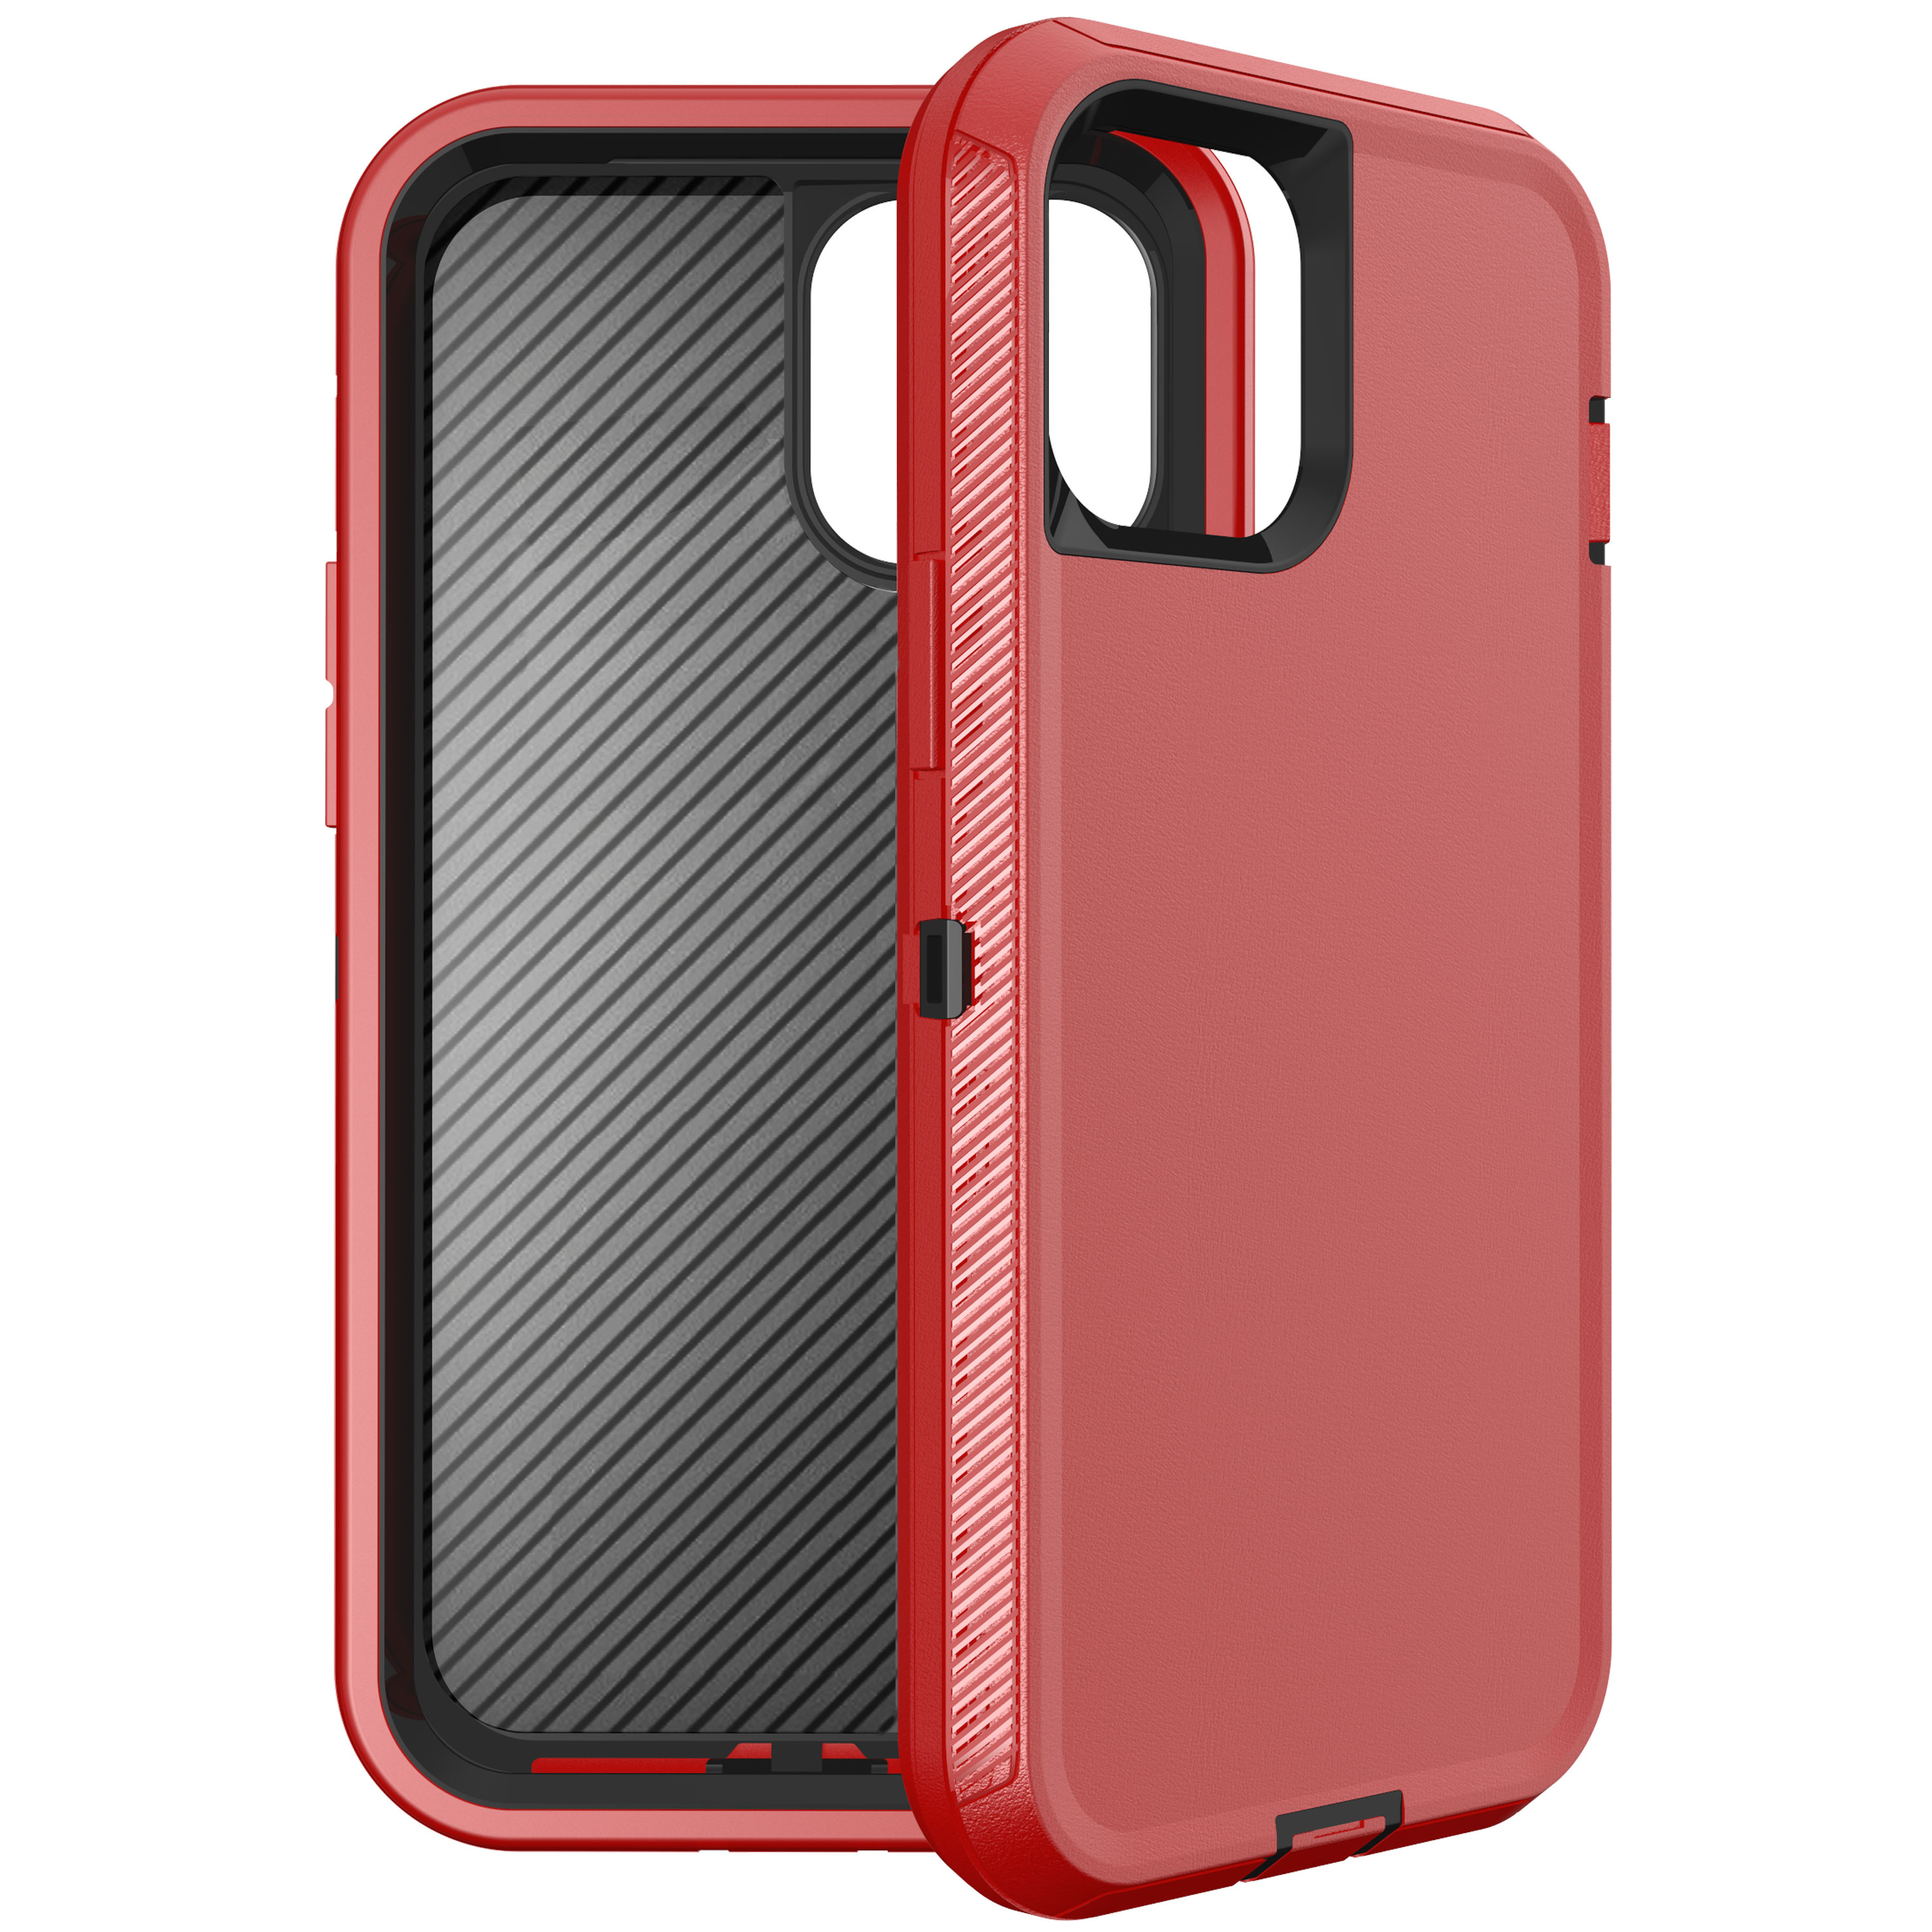 Armor Robot Case for iPHONE 12 / 12 Pro 6.1 (Red - Black)